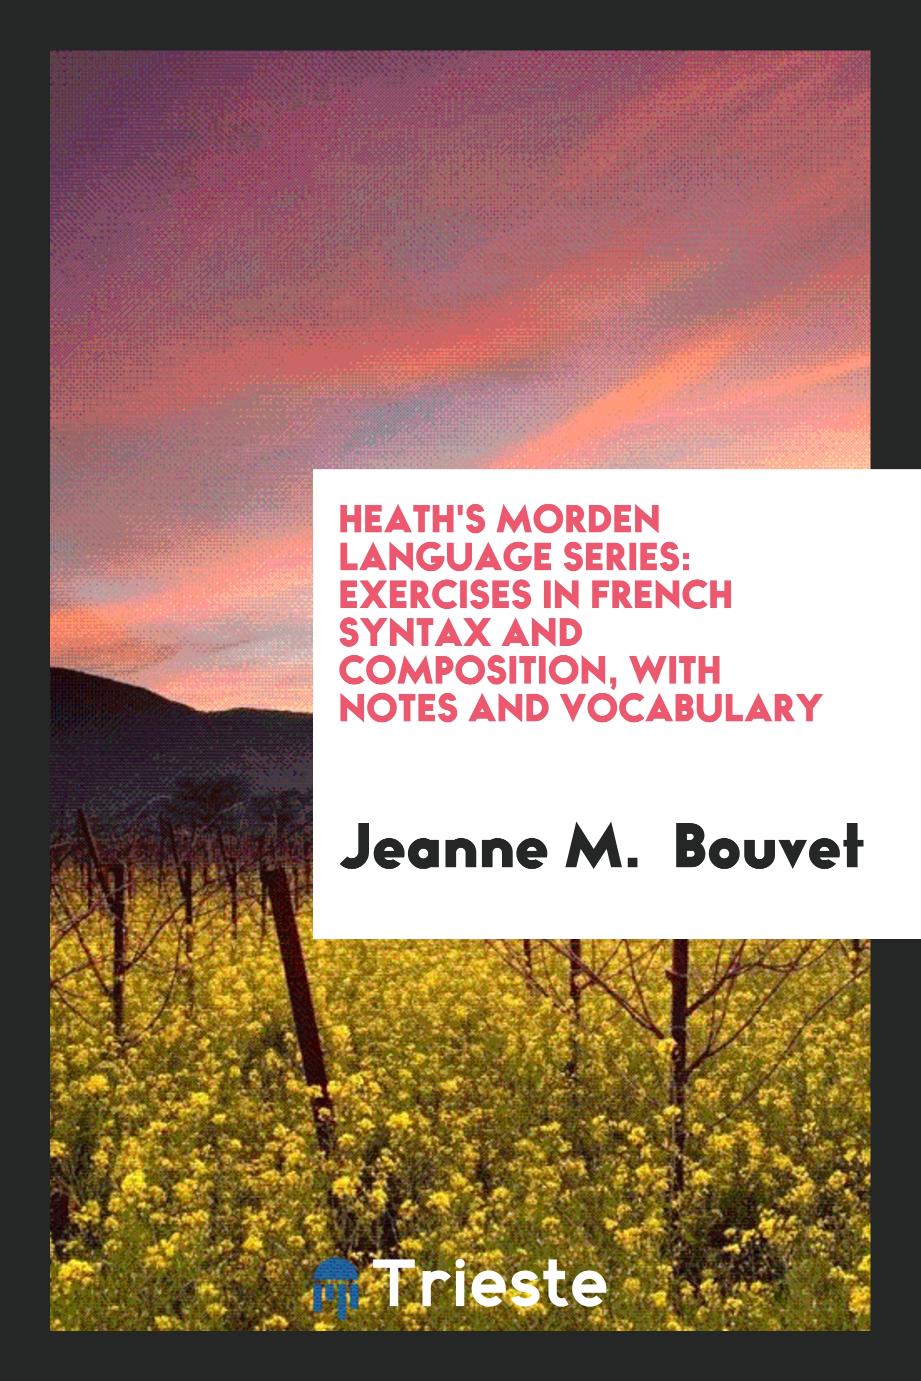 Heath's Morden Language Series: Exercises in French Syntax and Composition, with Notes and Vocabulary